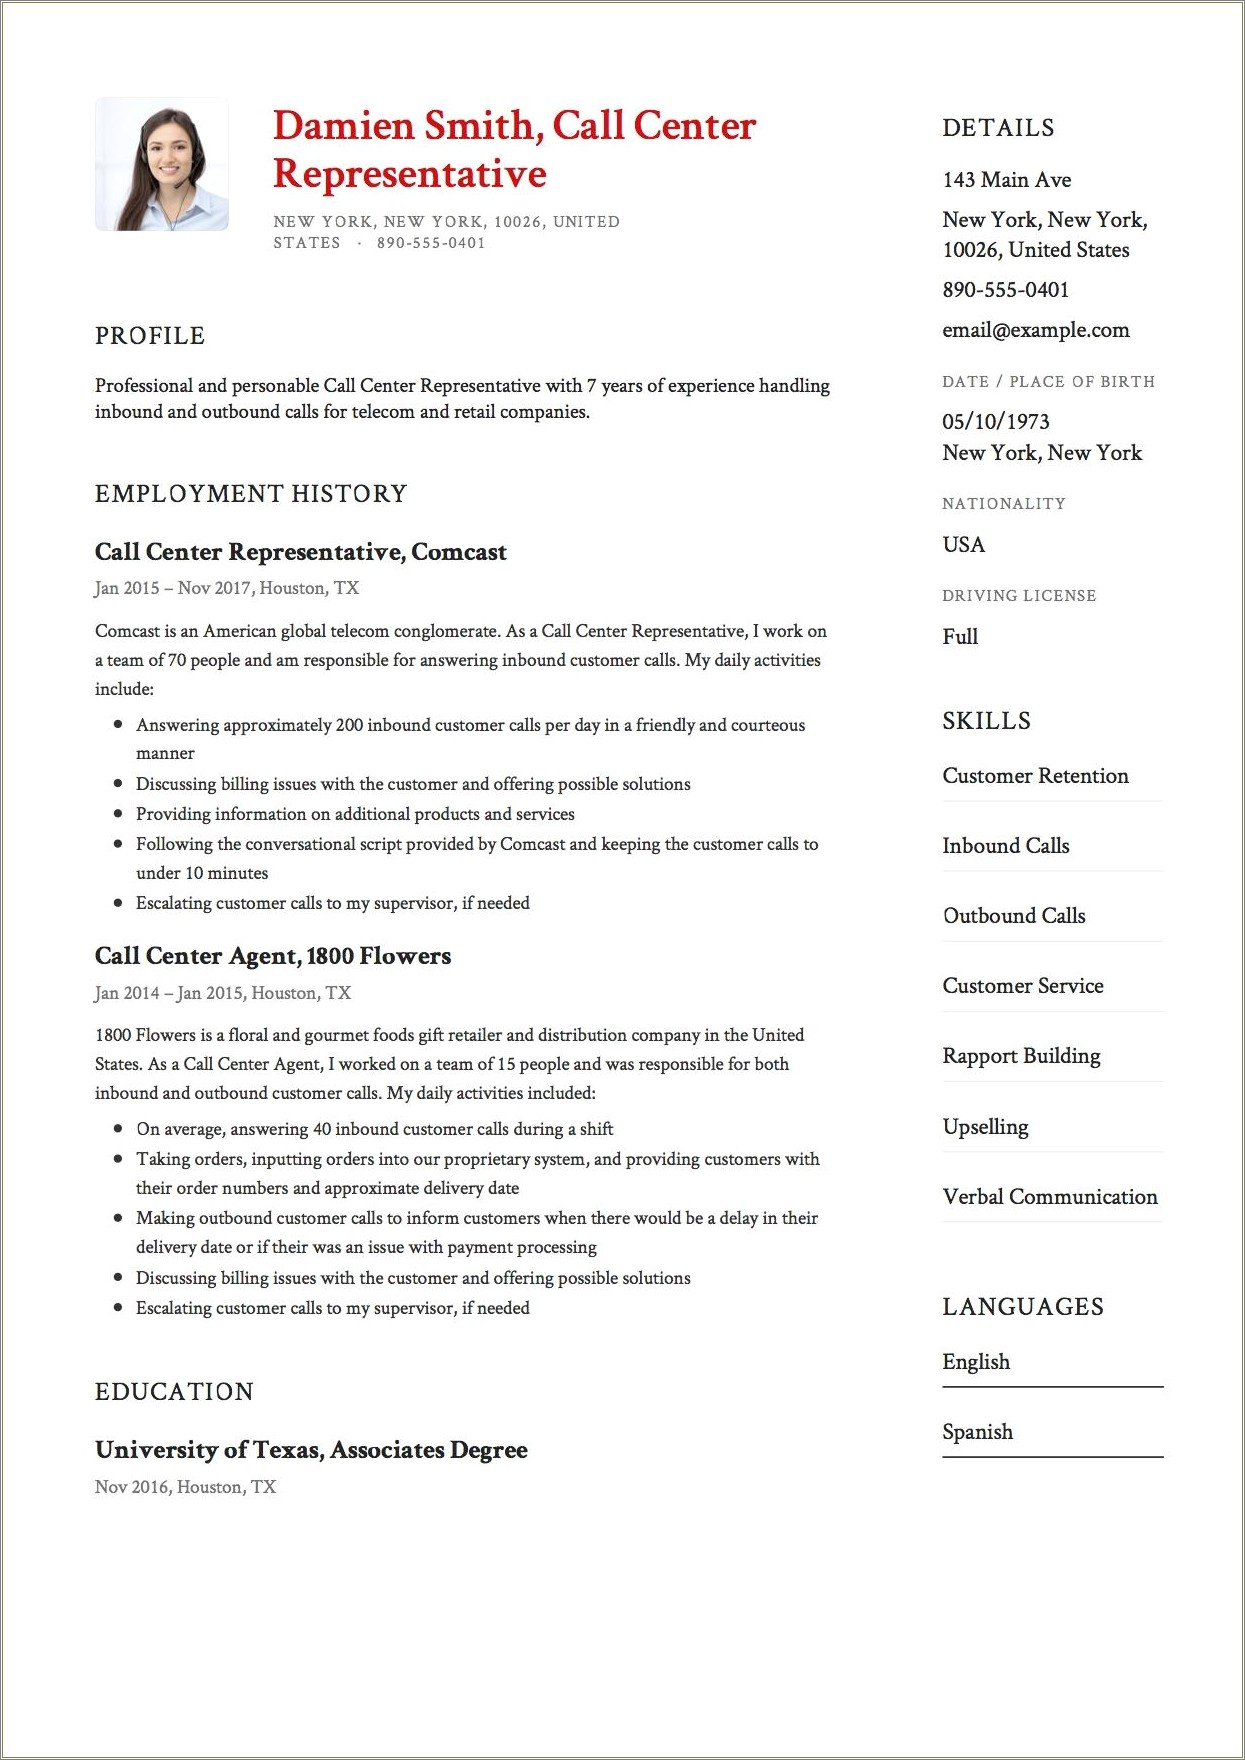 Resume Samples For Experienced Professionals In Bpo